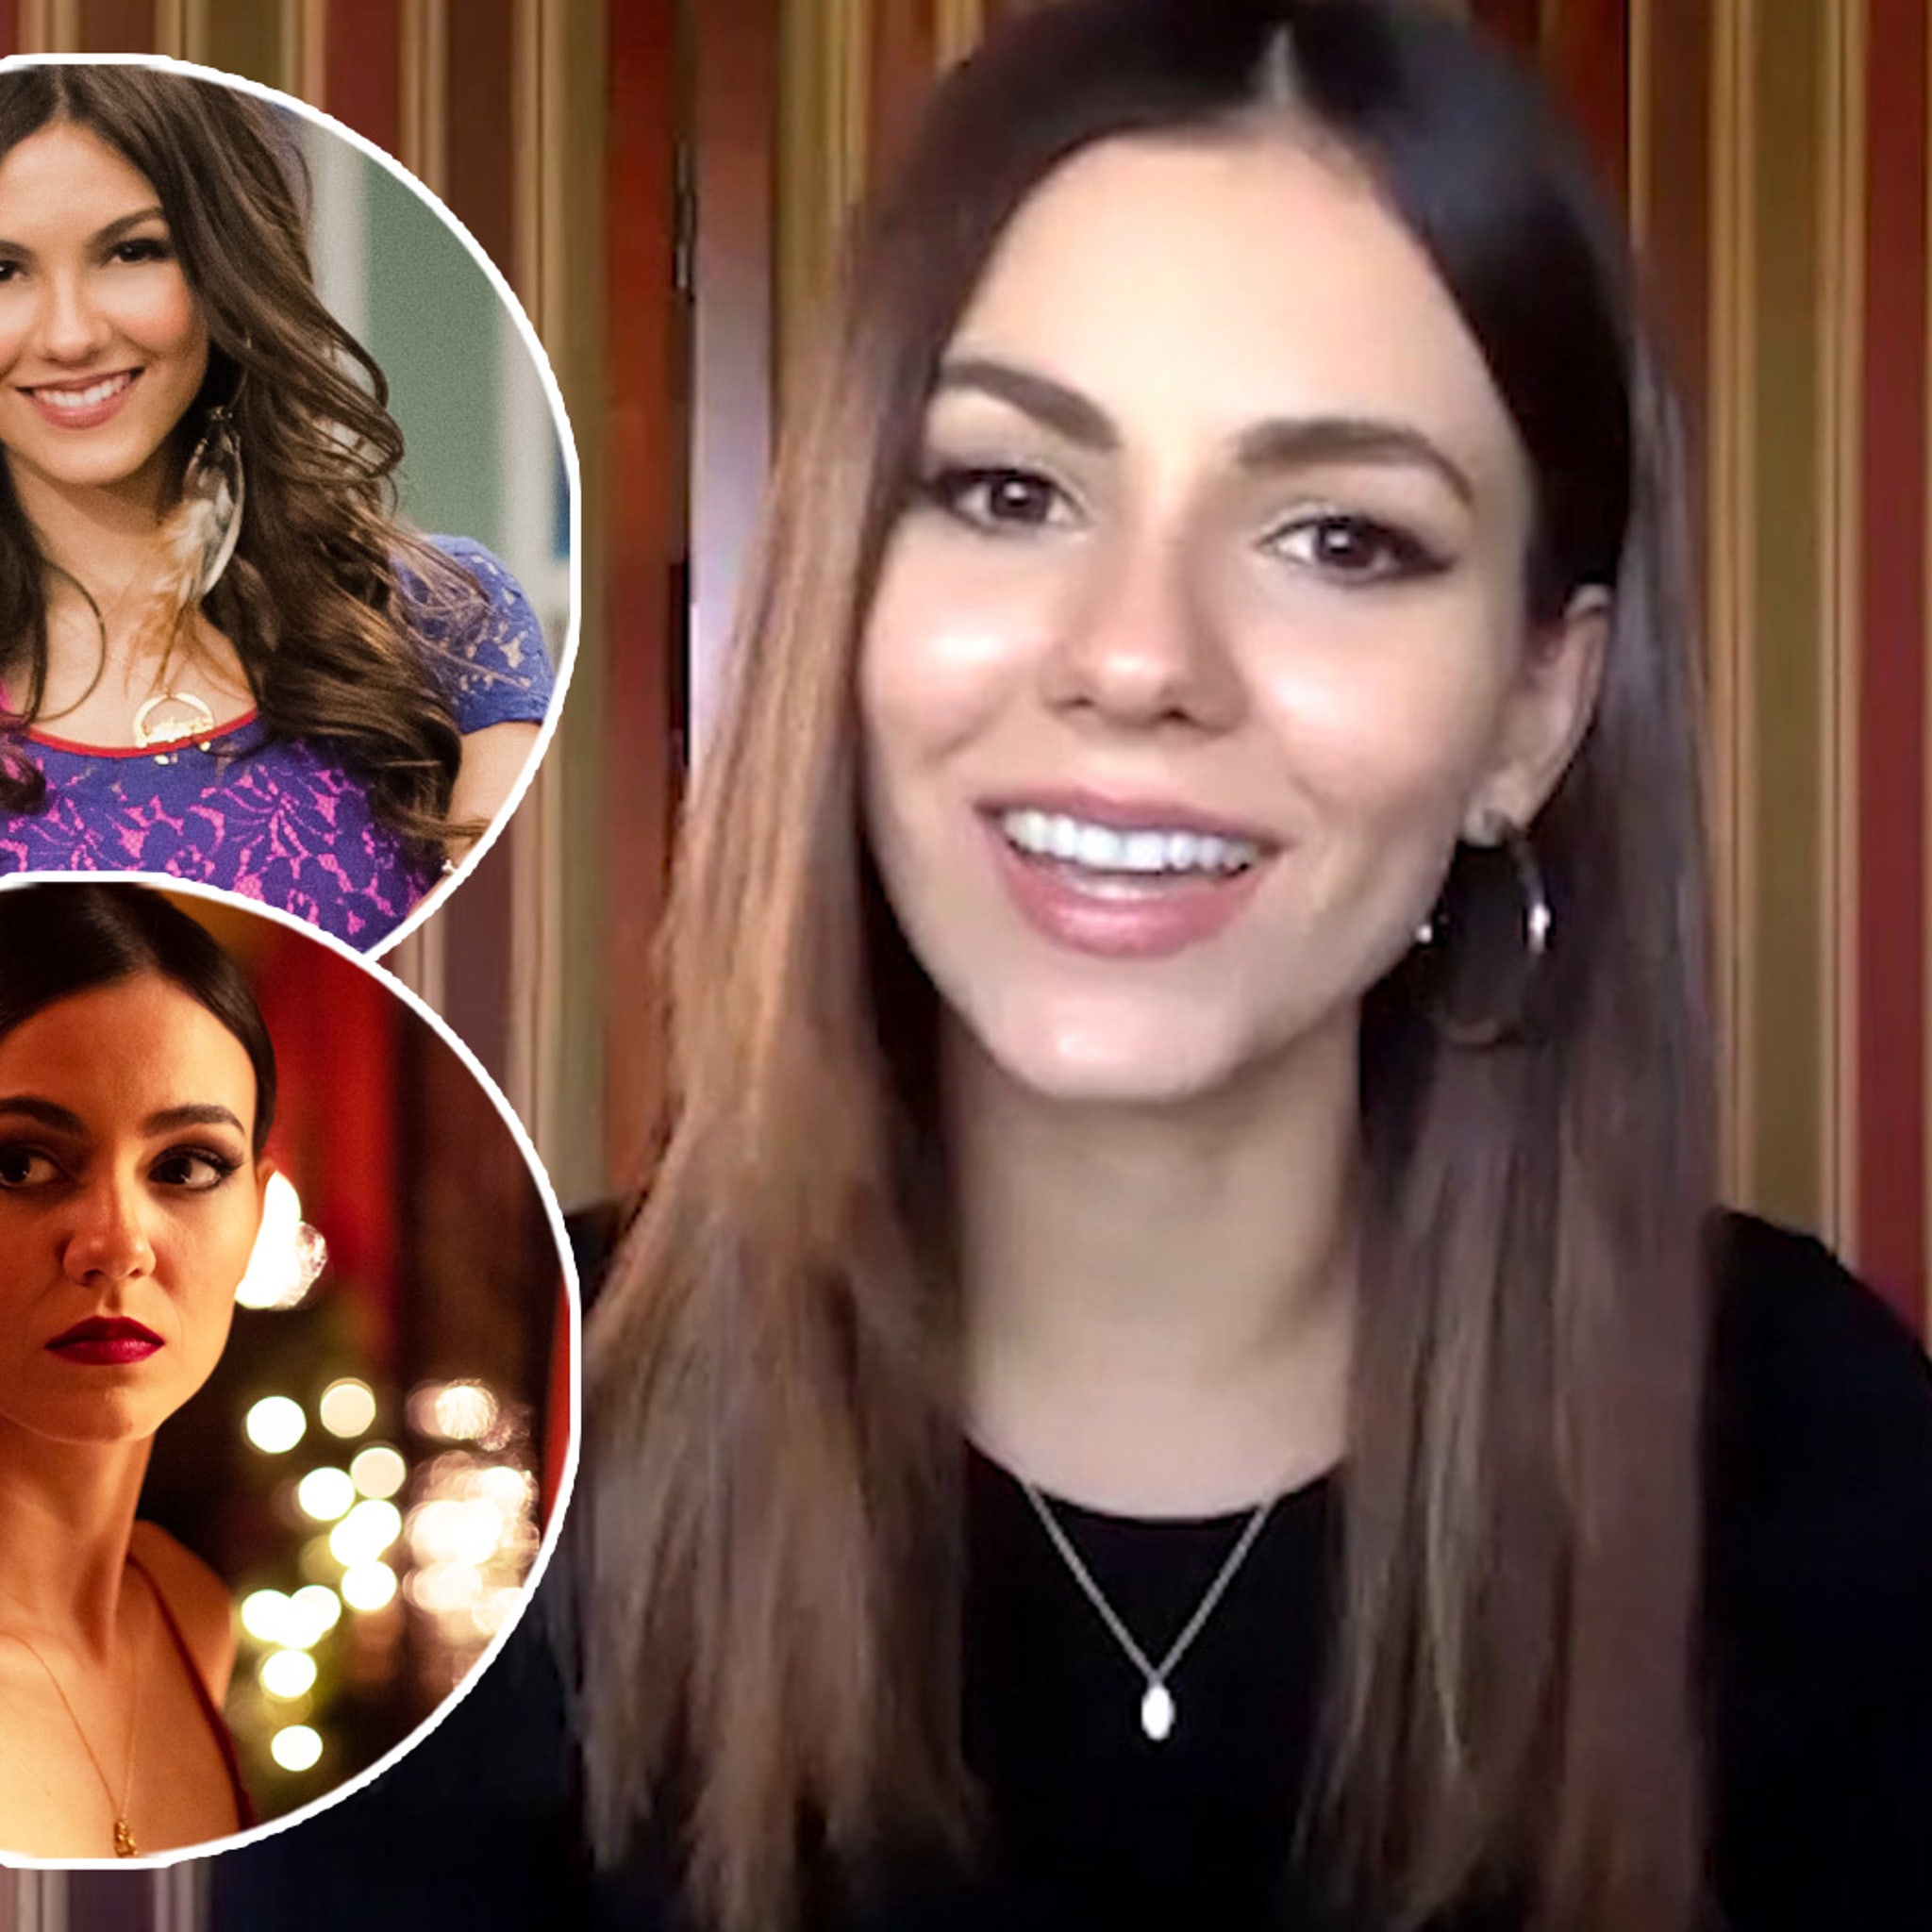 Victoria Justice Now: Details on Movies, Music After 'Victorious